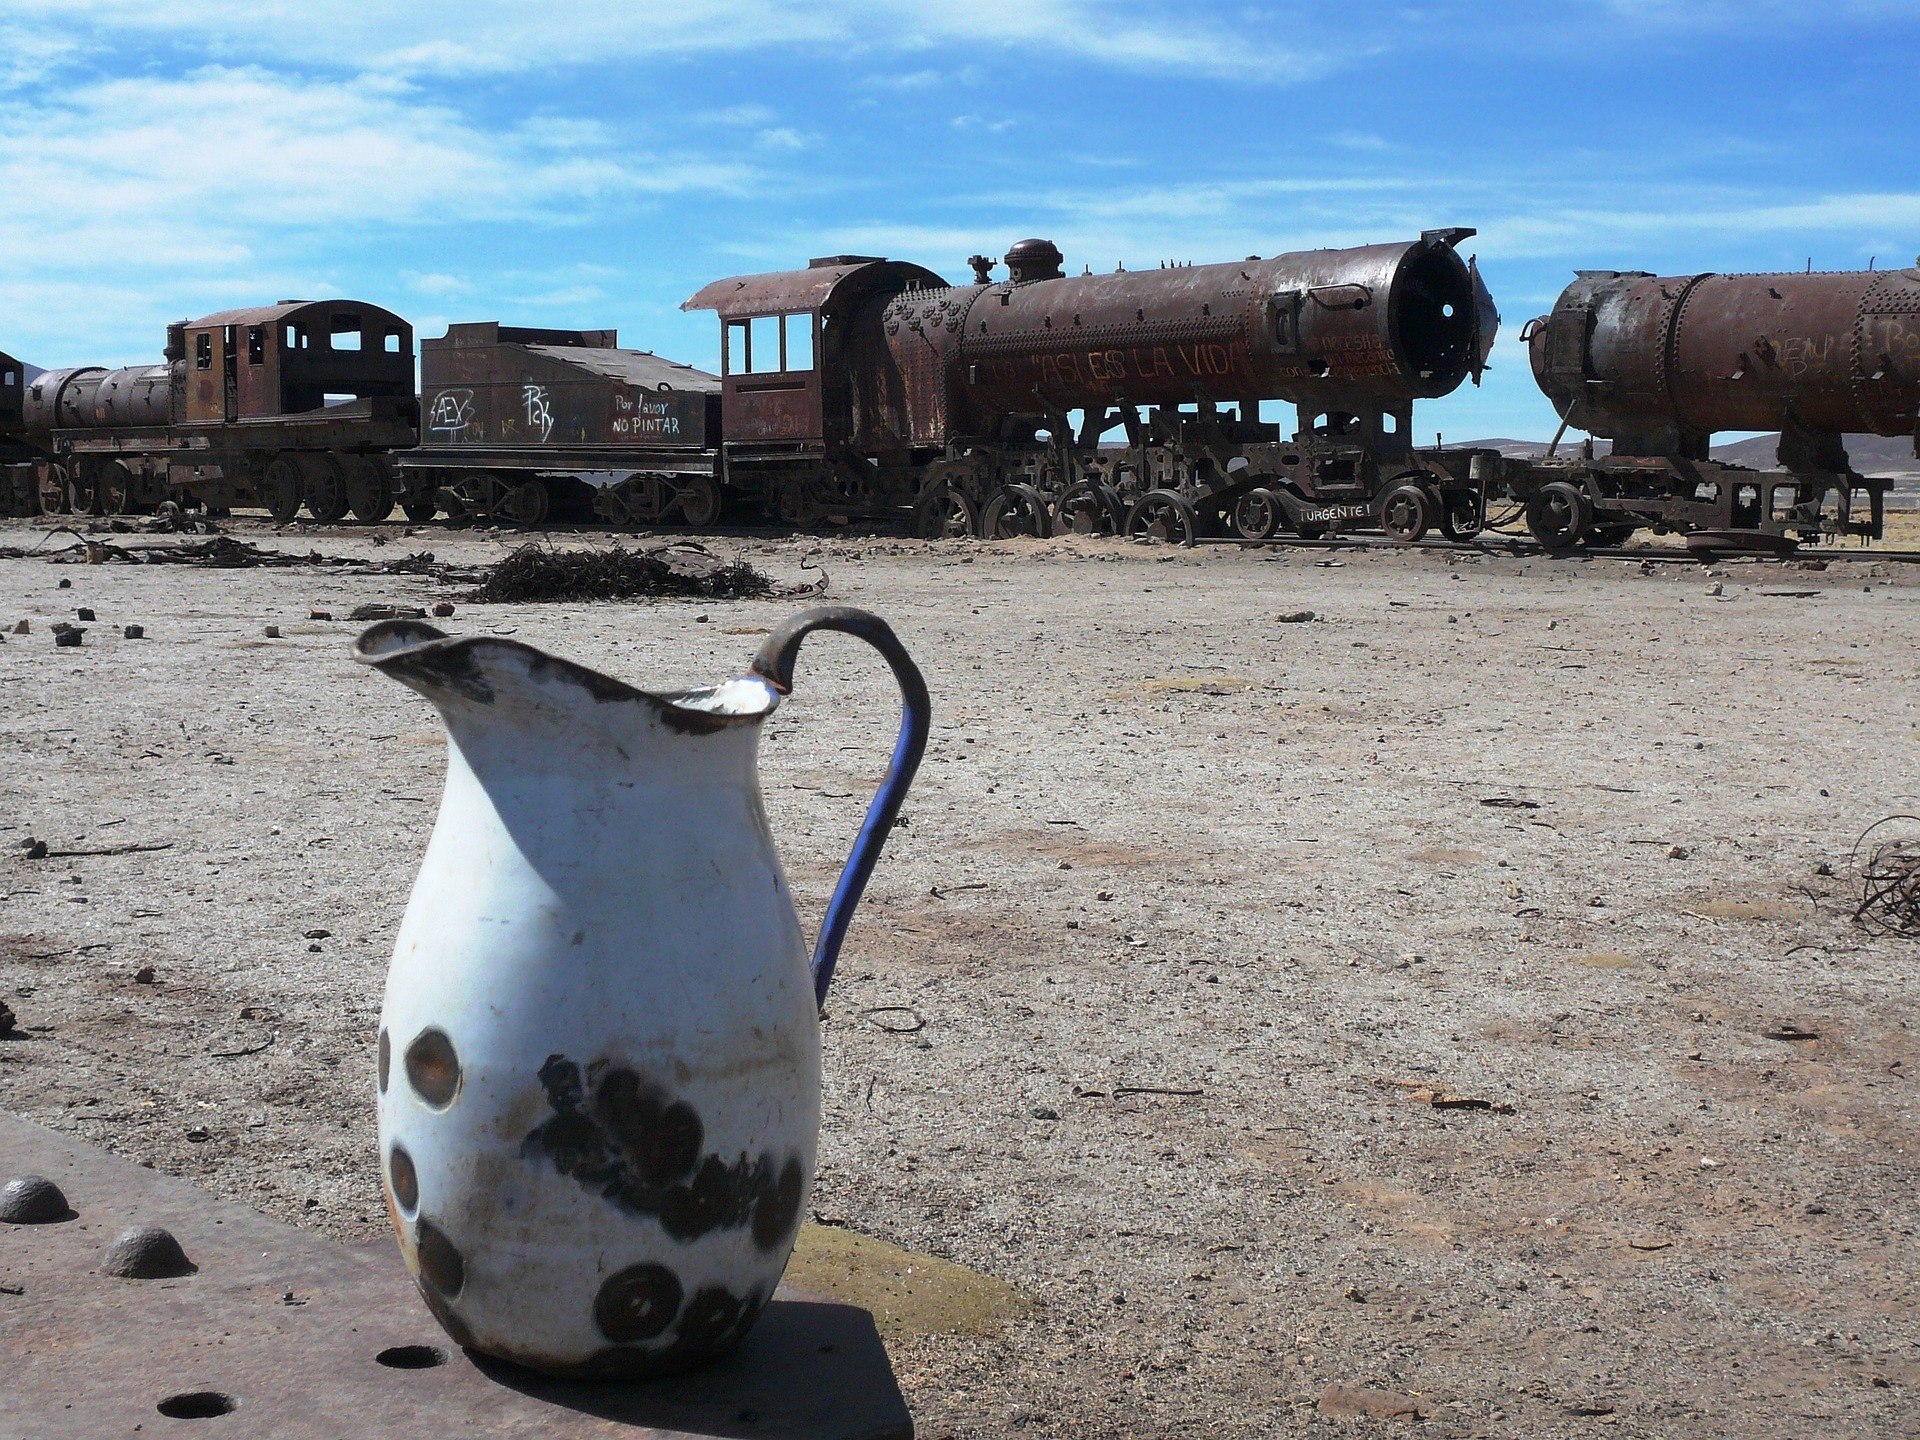 In the foreground, a battered, white clay water pitcher. In the background, abandoned train cars against a blue sky in the desert.